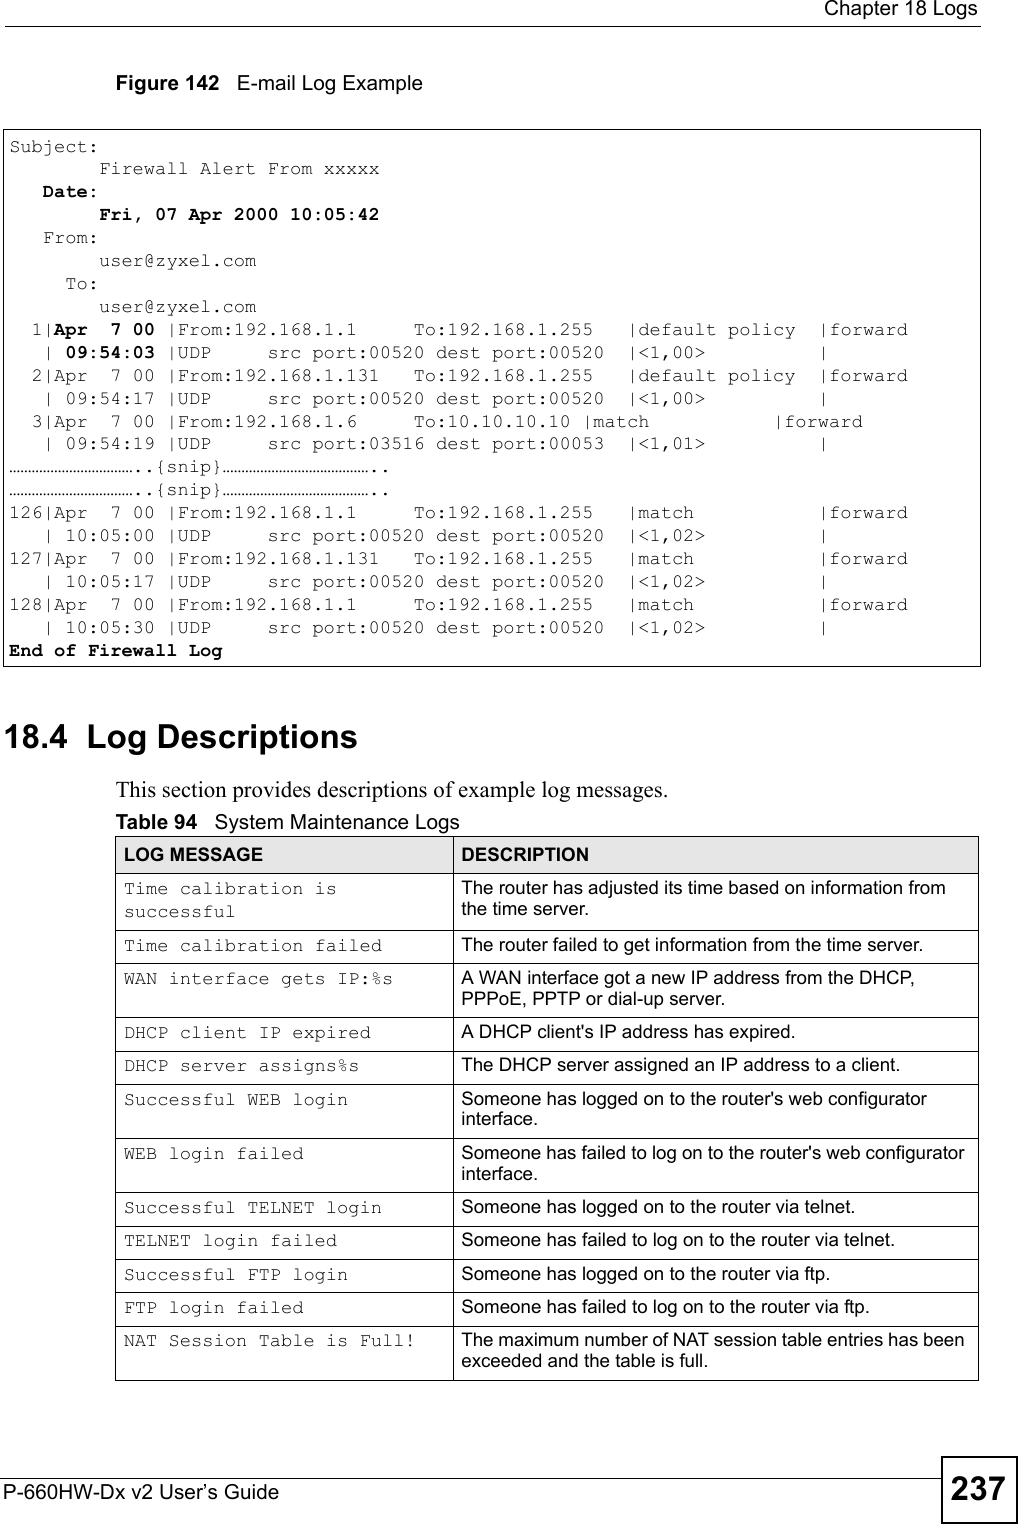  Chapter 18 LogsP-660HW-Dx v2 User’s Guide 237Figure 142   E-mail Log Example18.4  Log DescriptionsThis section provides descriptions of example log messages. Subject:         Firewall Alert From xxxxx   Date:         Fri, 07 Apr 2000 10:05:42   From:         user@zyxel.com     To:         user@zyxel.com  1|Apr  7 00 |From:192.168.1.1     To:192.168.1.255   |default policy  |forward   | 09:54:03 |UDP     src port:00520 dest port:00520  |&lt;1,00&gt;          |         2|Apr  7 00 |From:192.168.1.131   To:192.168.1.255   |default policy  |forward   | 09:54:17 |UDP     src port:00520 dest port:00520  |&lt;1,00&gt;          |         3|Apr  7 00 |From:192.168.1.6     To:10.10.10.10 |match           |forward   | 09:54:19 |UDP     src port:03516 dest port:00053  |&lt;1,01&gt;          |       ……………………………..{snip}…………………………………..……………………………..{snip}…………………………………..126|Apr  7 00 |From:192.168.1.1     To:192.168.1.255   |match           |forward   | 10:05:00 |UDP     src port:00520 dest port:00520  |&lt;1,02&gt;          |       127|Apr  7 00 |From:192.168.1.131   To:192.168.1.255   |match           |forward   | 10:05:17 |UDP     src port:00520 dest port:00520  |&lt;1,02&gt;          |       128|Apr  7 00 |From:192.168.1.1     To:192.168.1.255   |match           |forward   | 10:05:30 |UDP     src port:00520 dest port:00520  |&lt;1,02&gt;          |       End of Firewall LogTable 94   System Maintenance LogsLOG MESSAGE DESCRIPTIONTime calibration is successfulThe router has adjusted its time based on information from the time server.Time calibration failed The router failed to get information from the time server.WAN interface gets IP:%s A WAN interface got a new IP address from the DHCP, PPPoE, PPTP or dial-up server.DHCP client IP expired A DHCP client&apos;s IP address has expired.DHCP server assigns%s The DHCP server assigned an IP address to a client.Successful WEB login Someone has logged on to the router&apos;s web configurator interface.WEB login failed Someone has failed to log on to the router&apos;s web configurator interface.Successful TELNET login Someone has logged on to the router via telnet.TELNET login failed Someone has failed to log on to the router via telnet.Successful FTP login Someone has logged on to the router via ftp.FTP login failed Someone has failed to log on to the router via ftp.NAT Session Table is Full! The maximum number of NAT session table entries has been exceeded and the table is full.